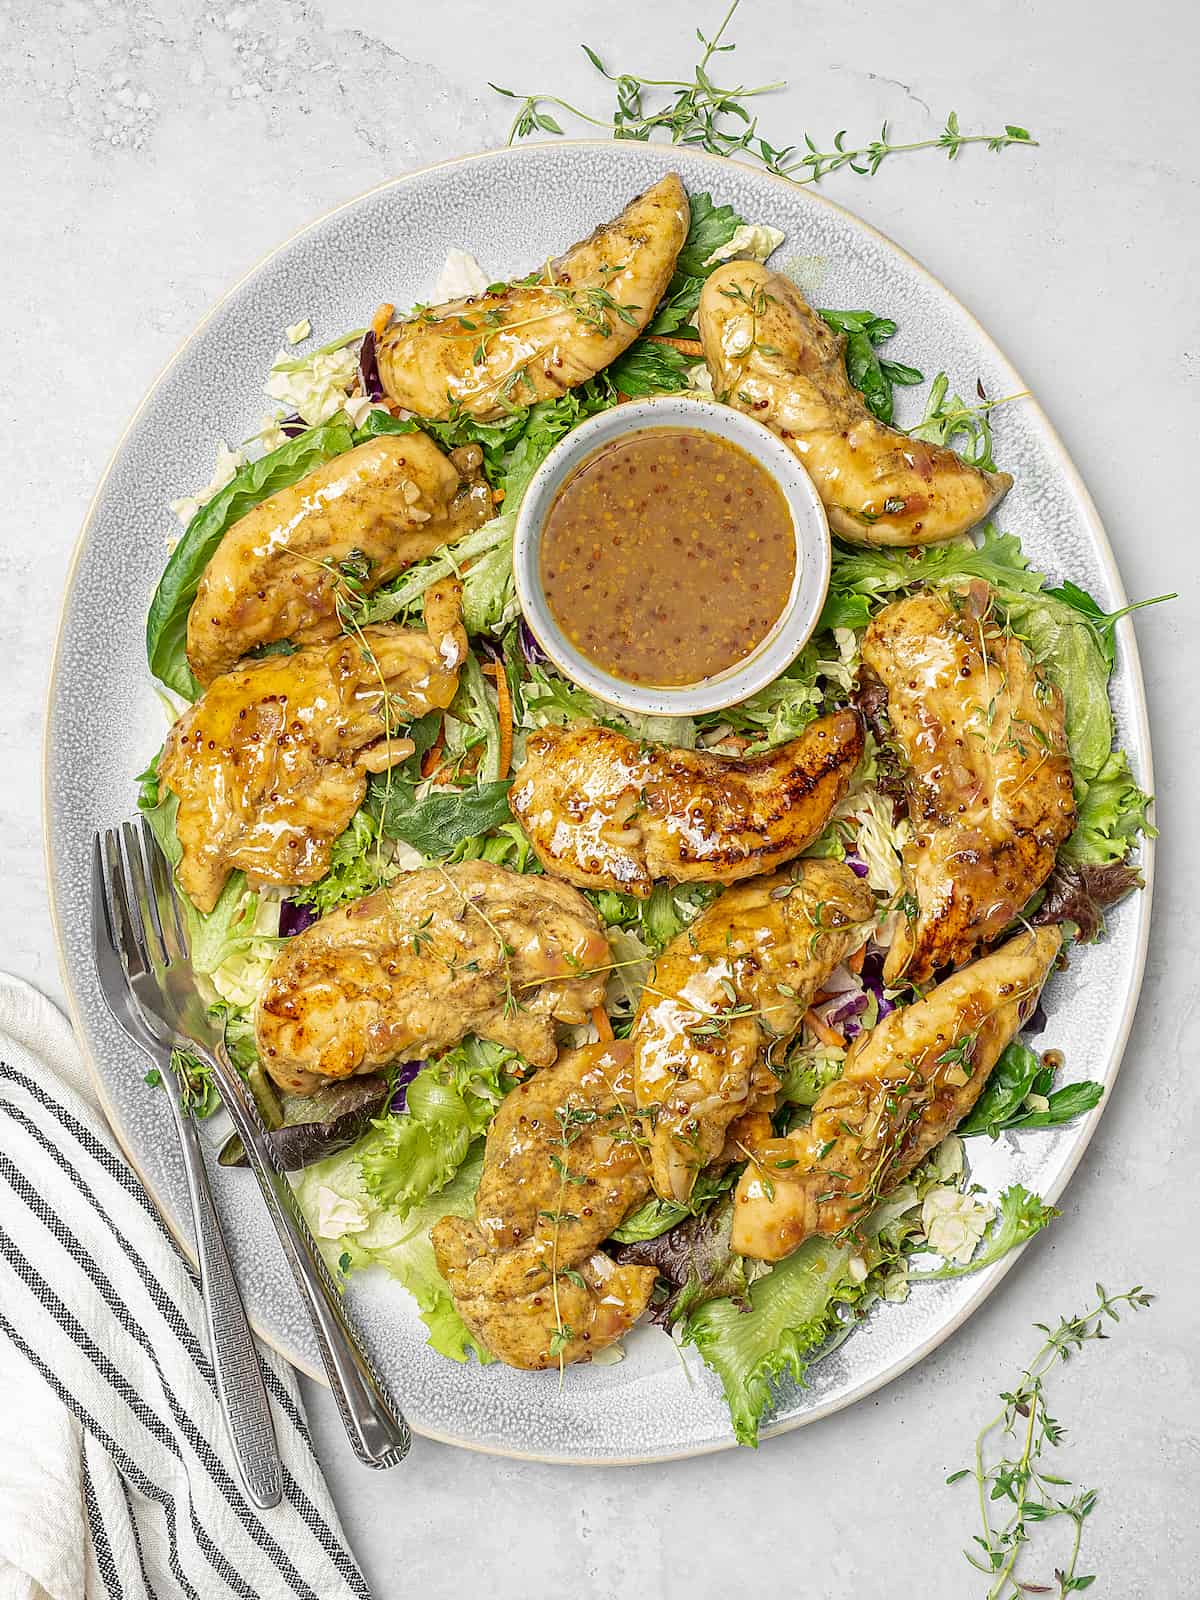 Platter of honey mustard chicken on bed of greens with extra sauce